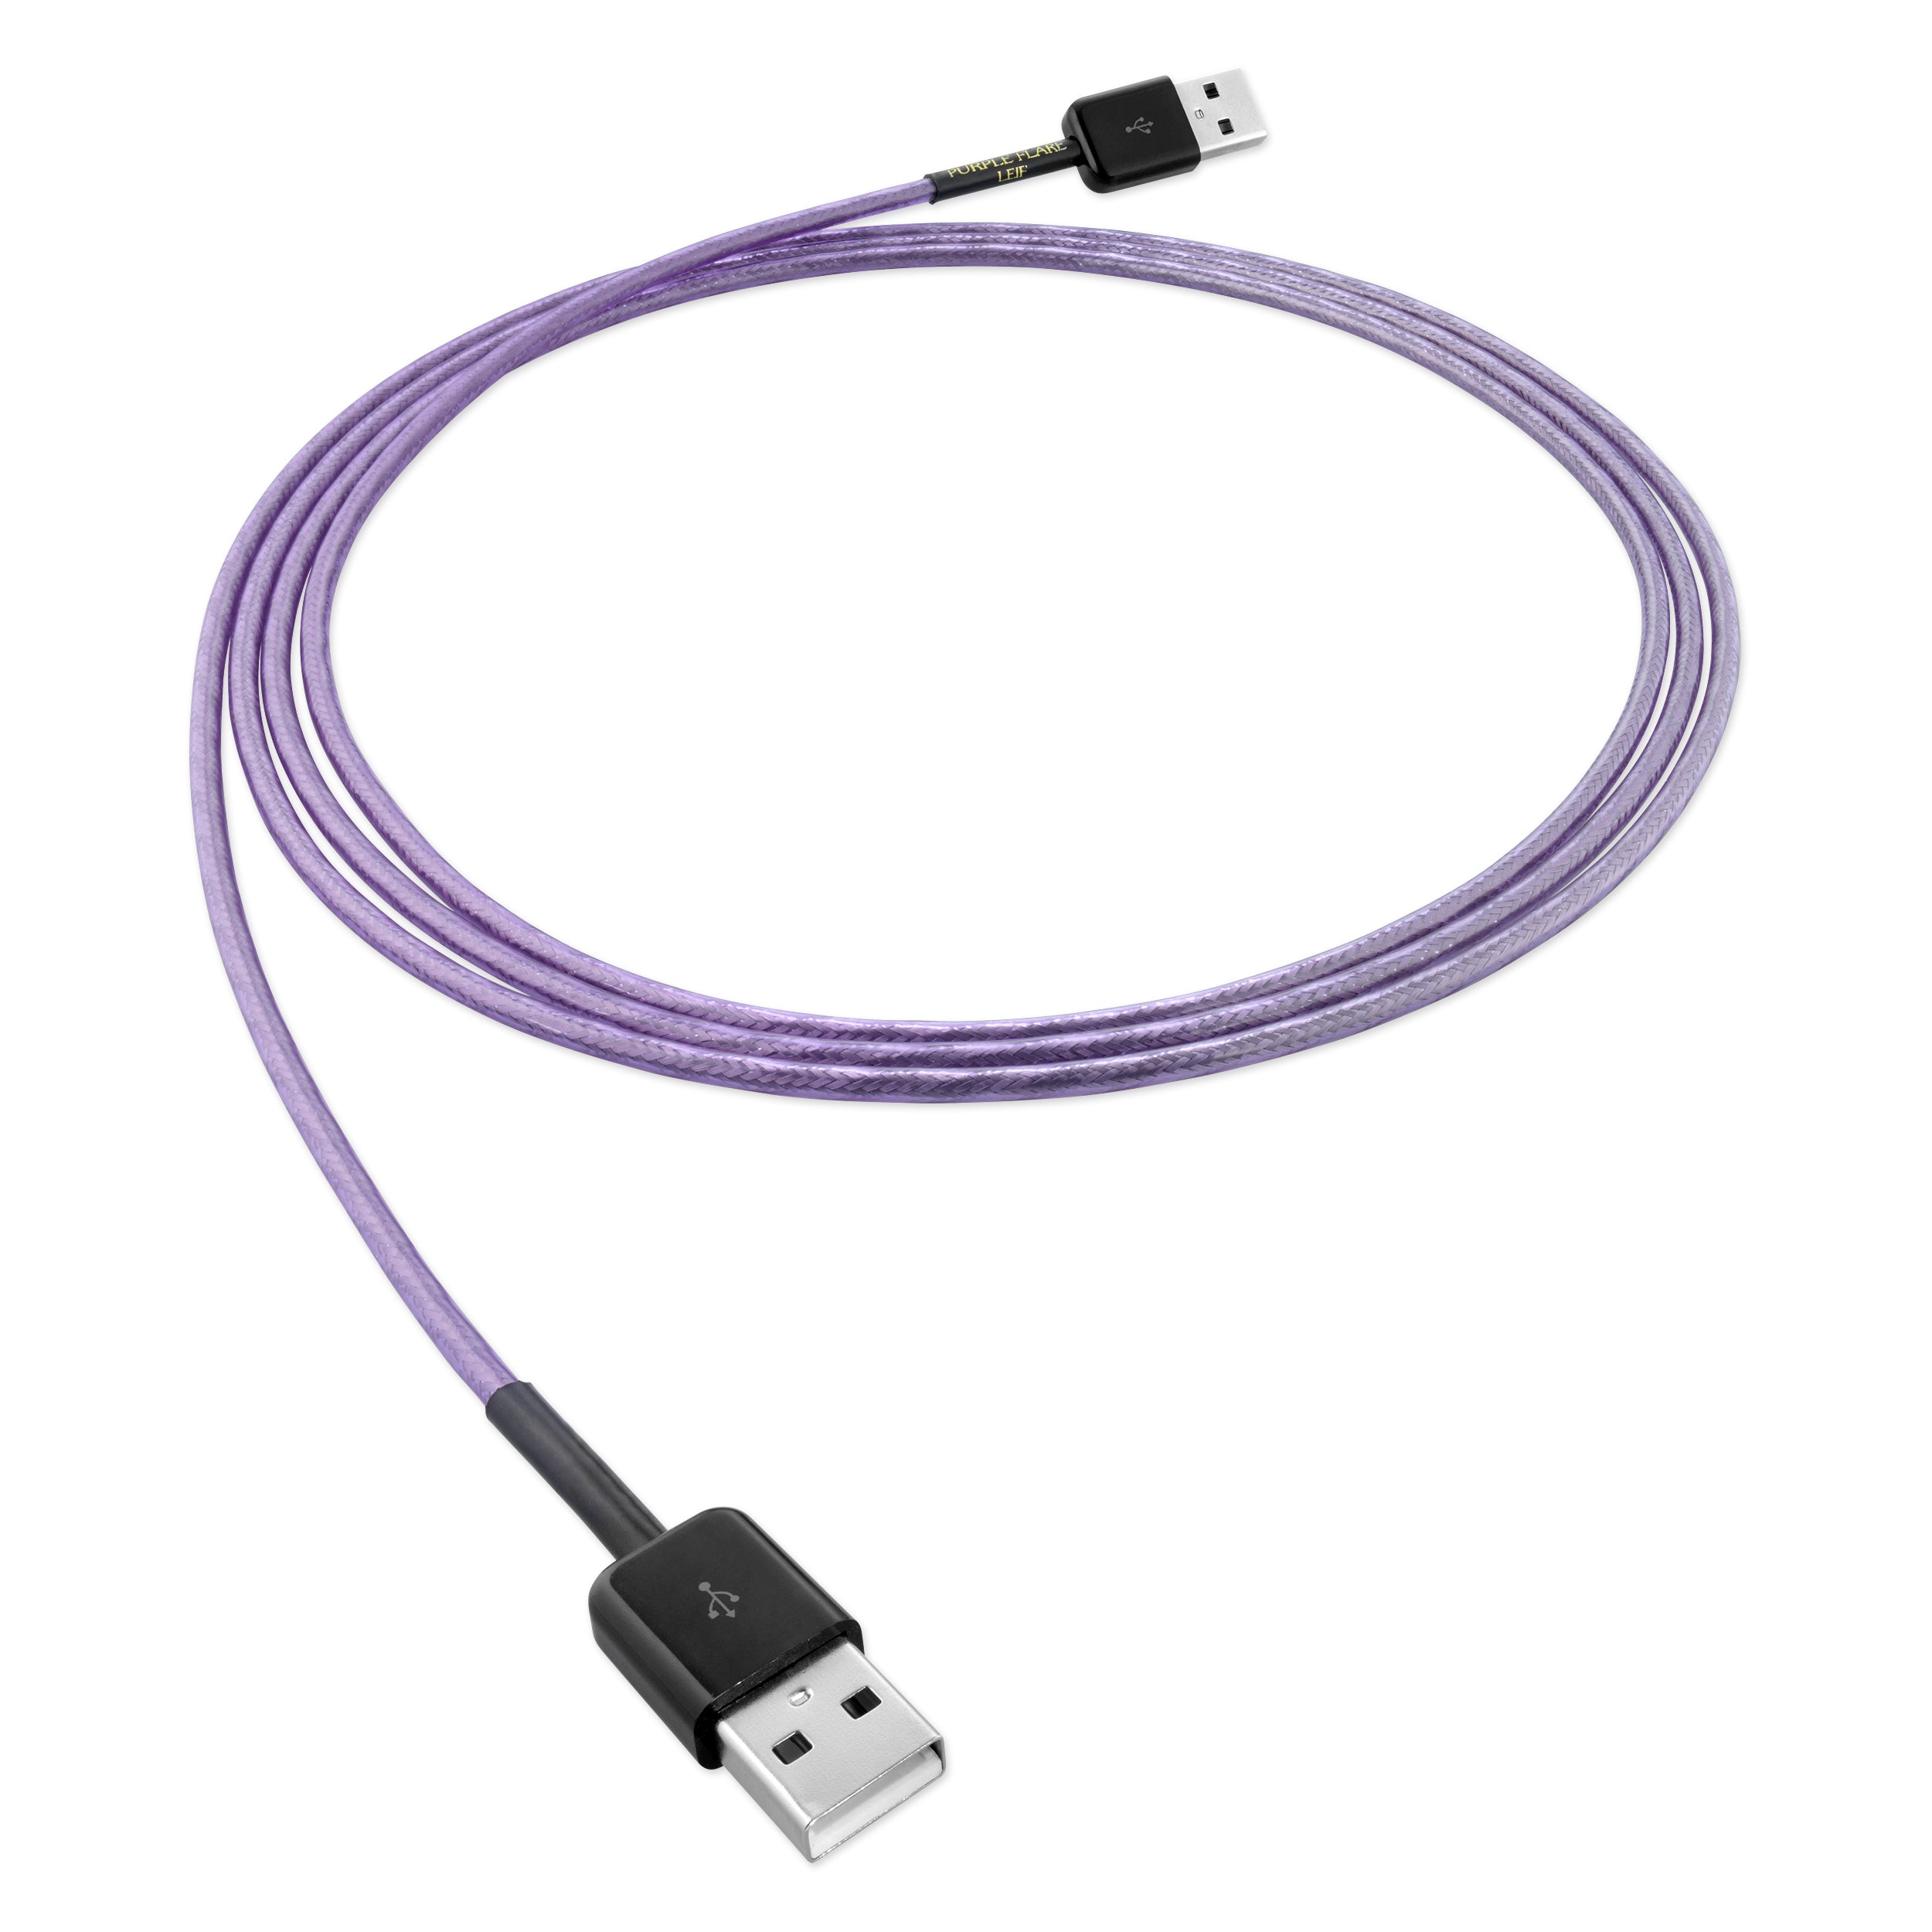 Nordost Leif Purple Flare USB 2.0 Cable